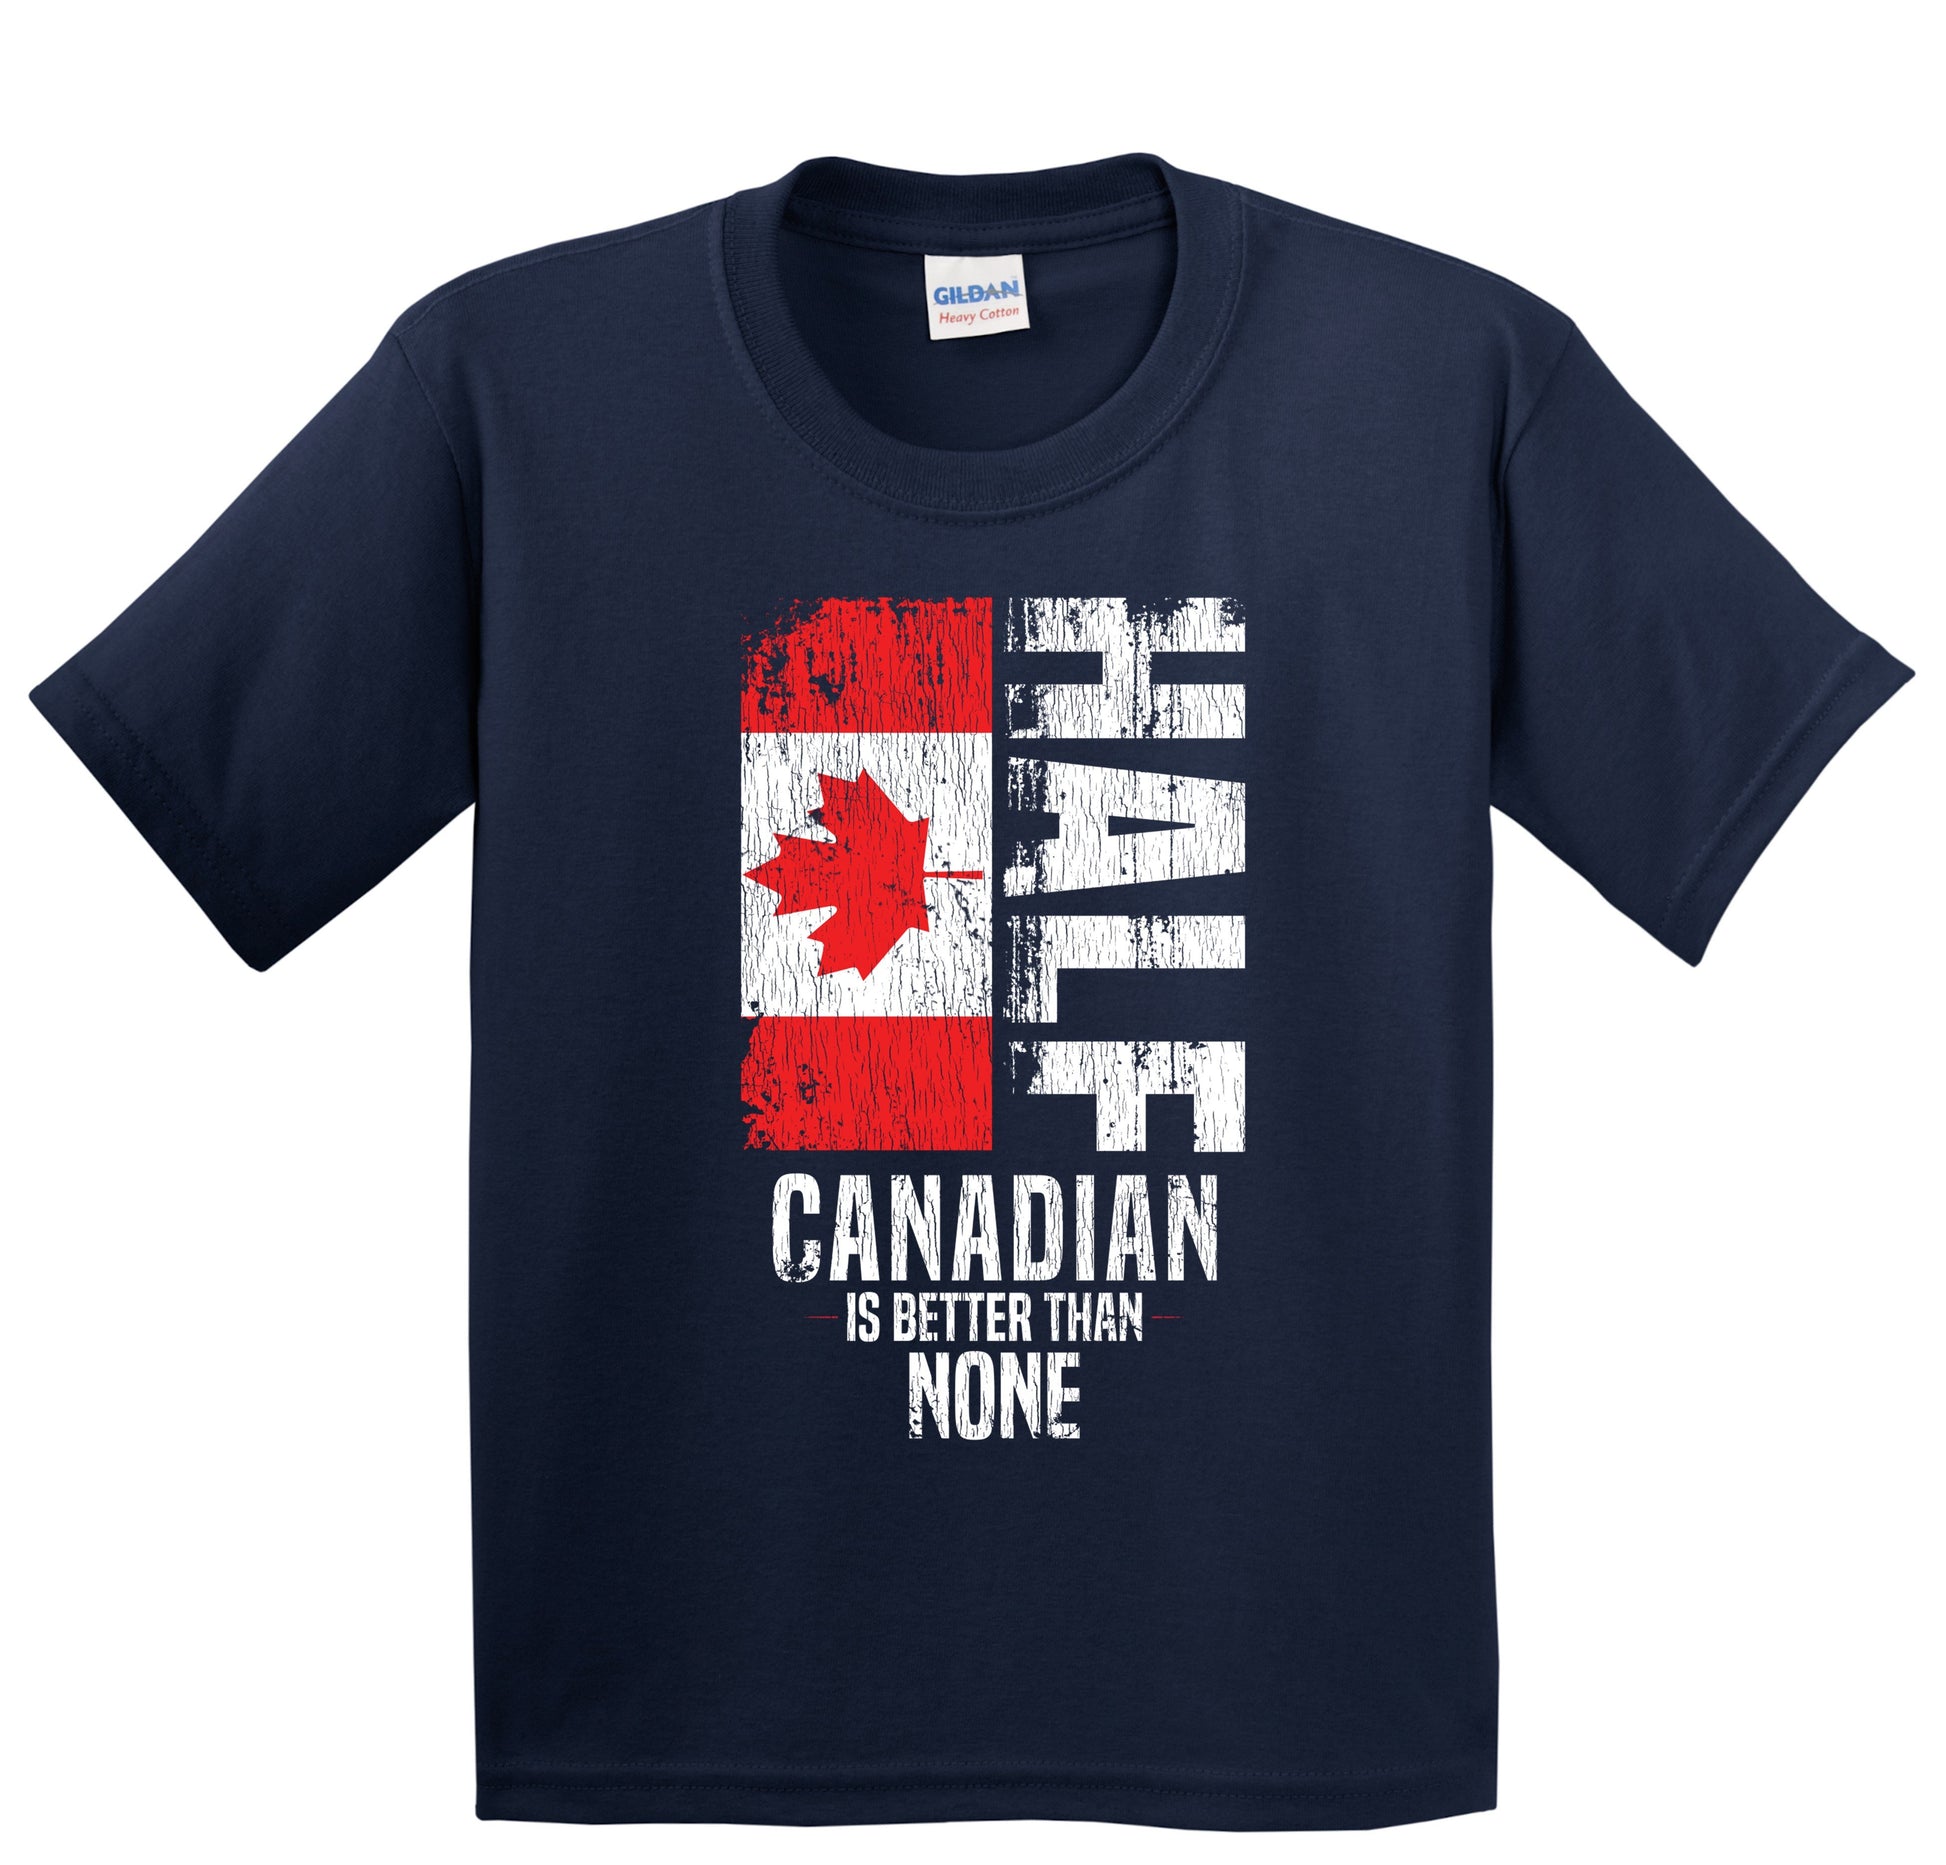 Half Canadian Is Better Than None Funny Youth T-Shirt Really Awesome Shirts